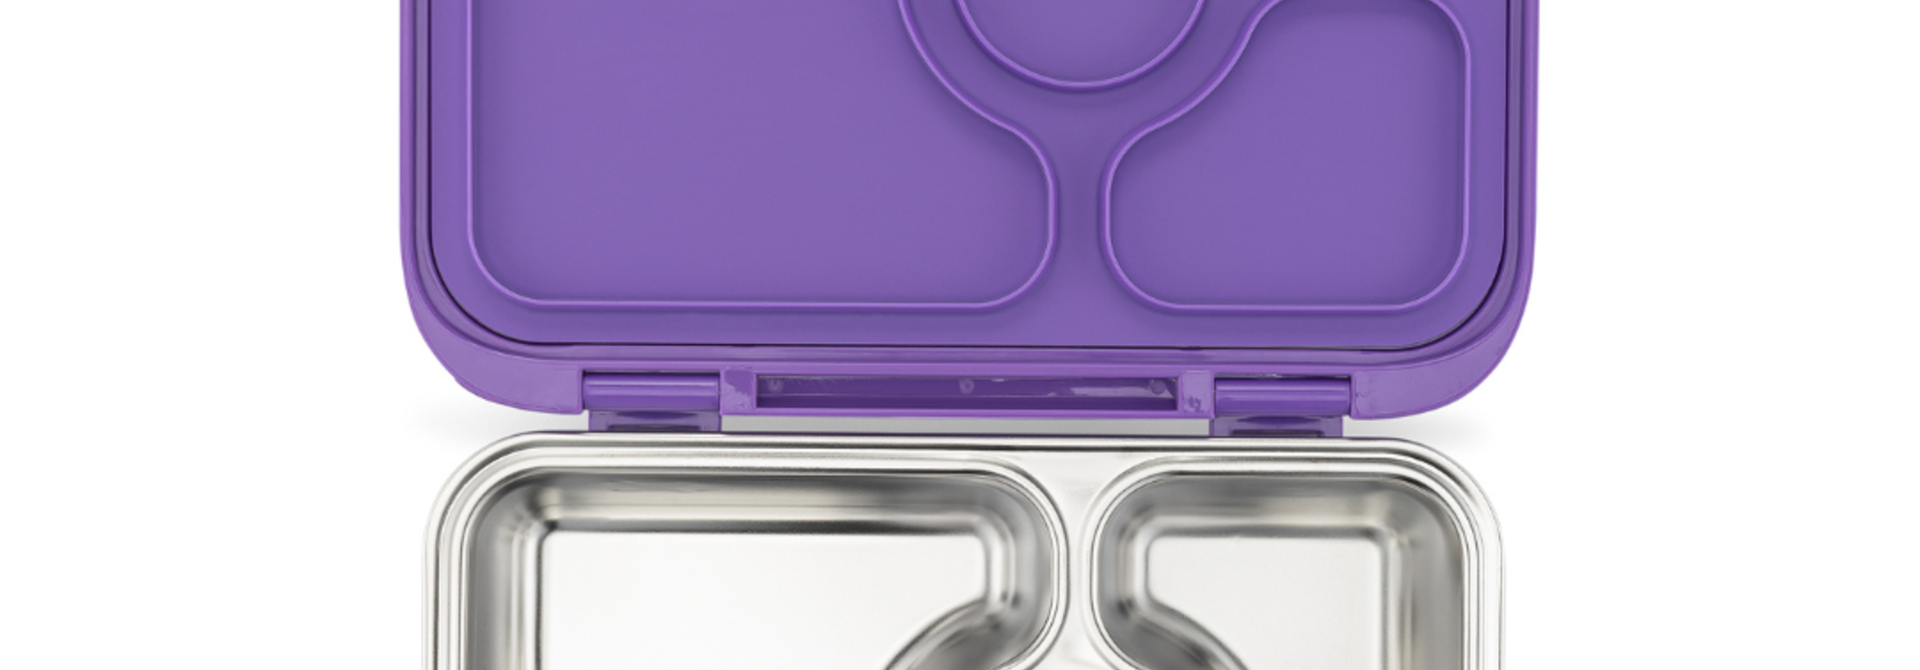 Yumbox Presto Stainless steel - leakproof Bento Box - lunchbox for adults - Remy Lavender